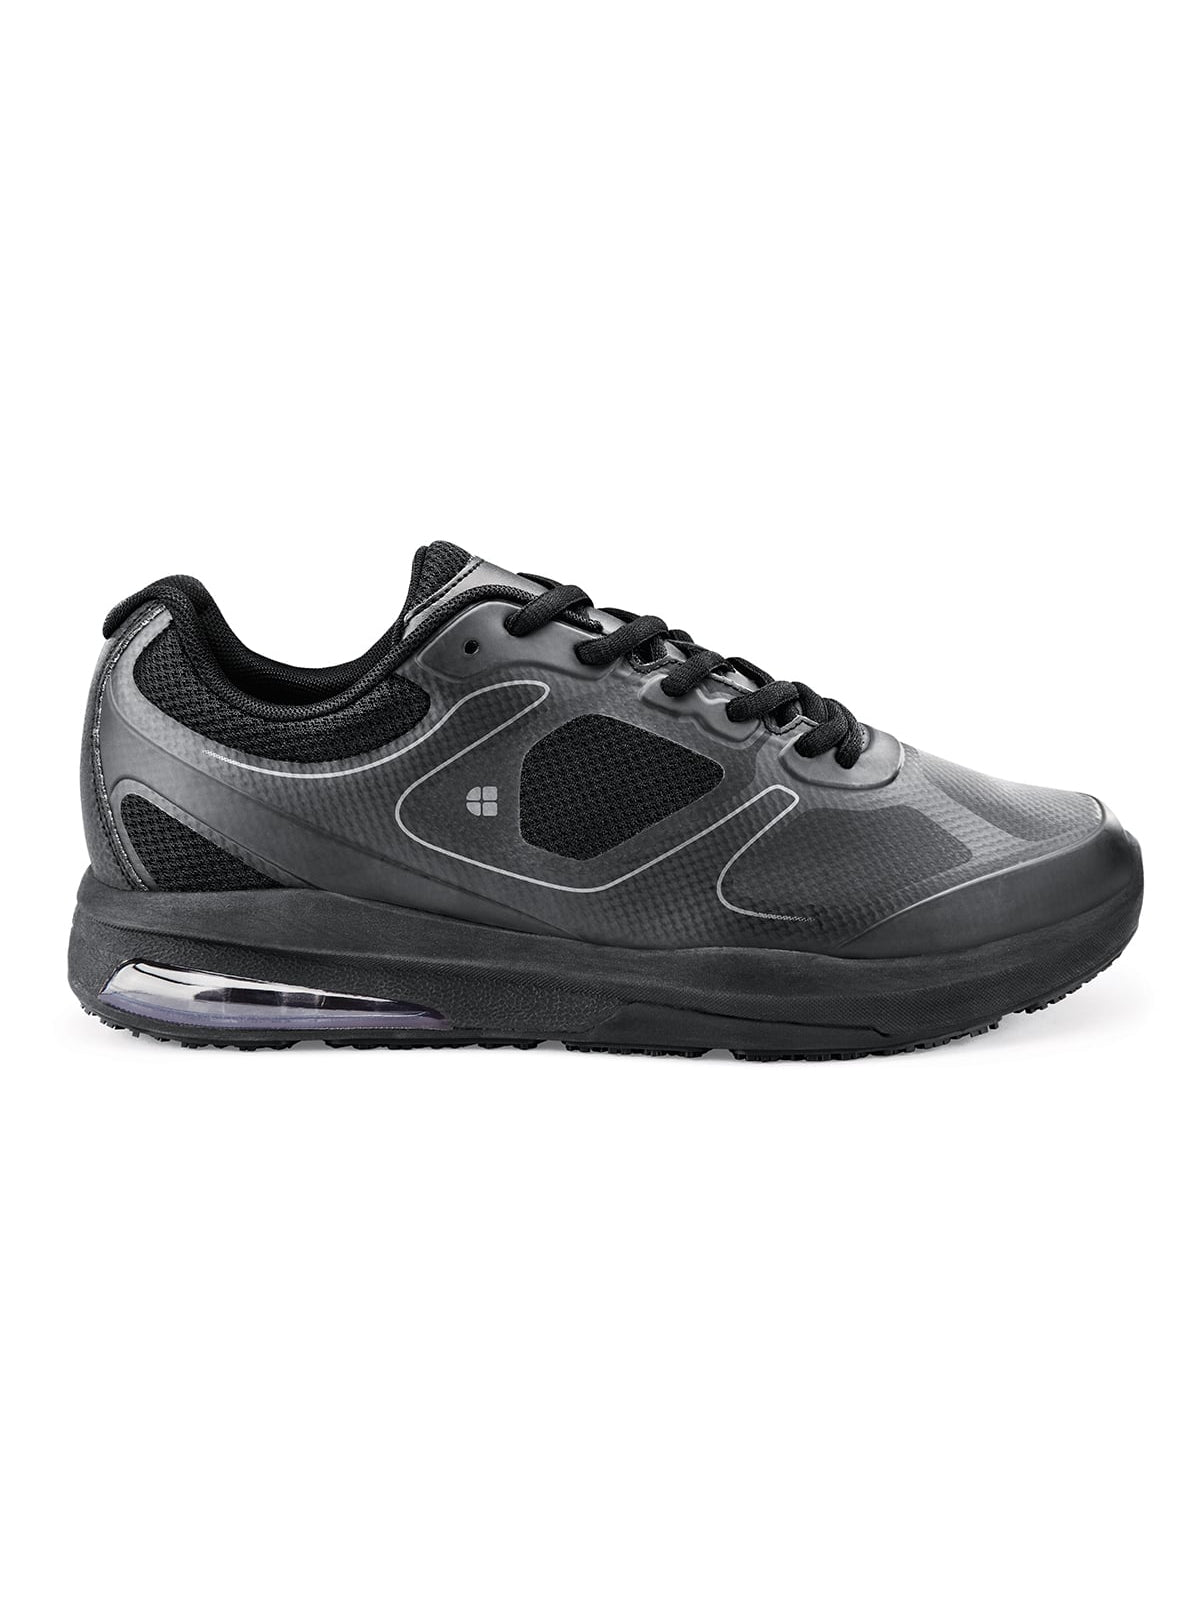 Women's Work Shoe Revolution 2 Black by Shoes For Crews -  ChefsCotton